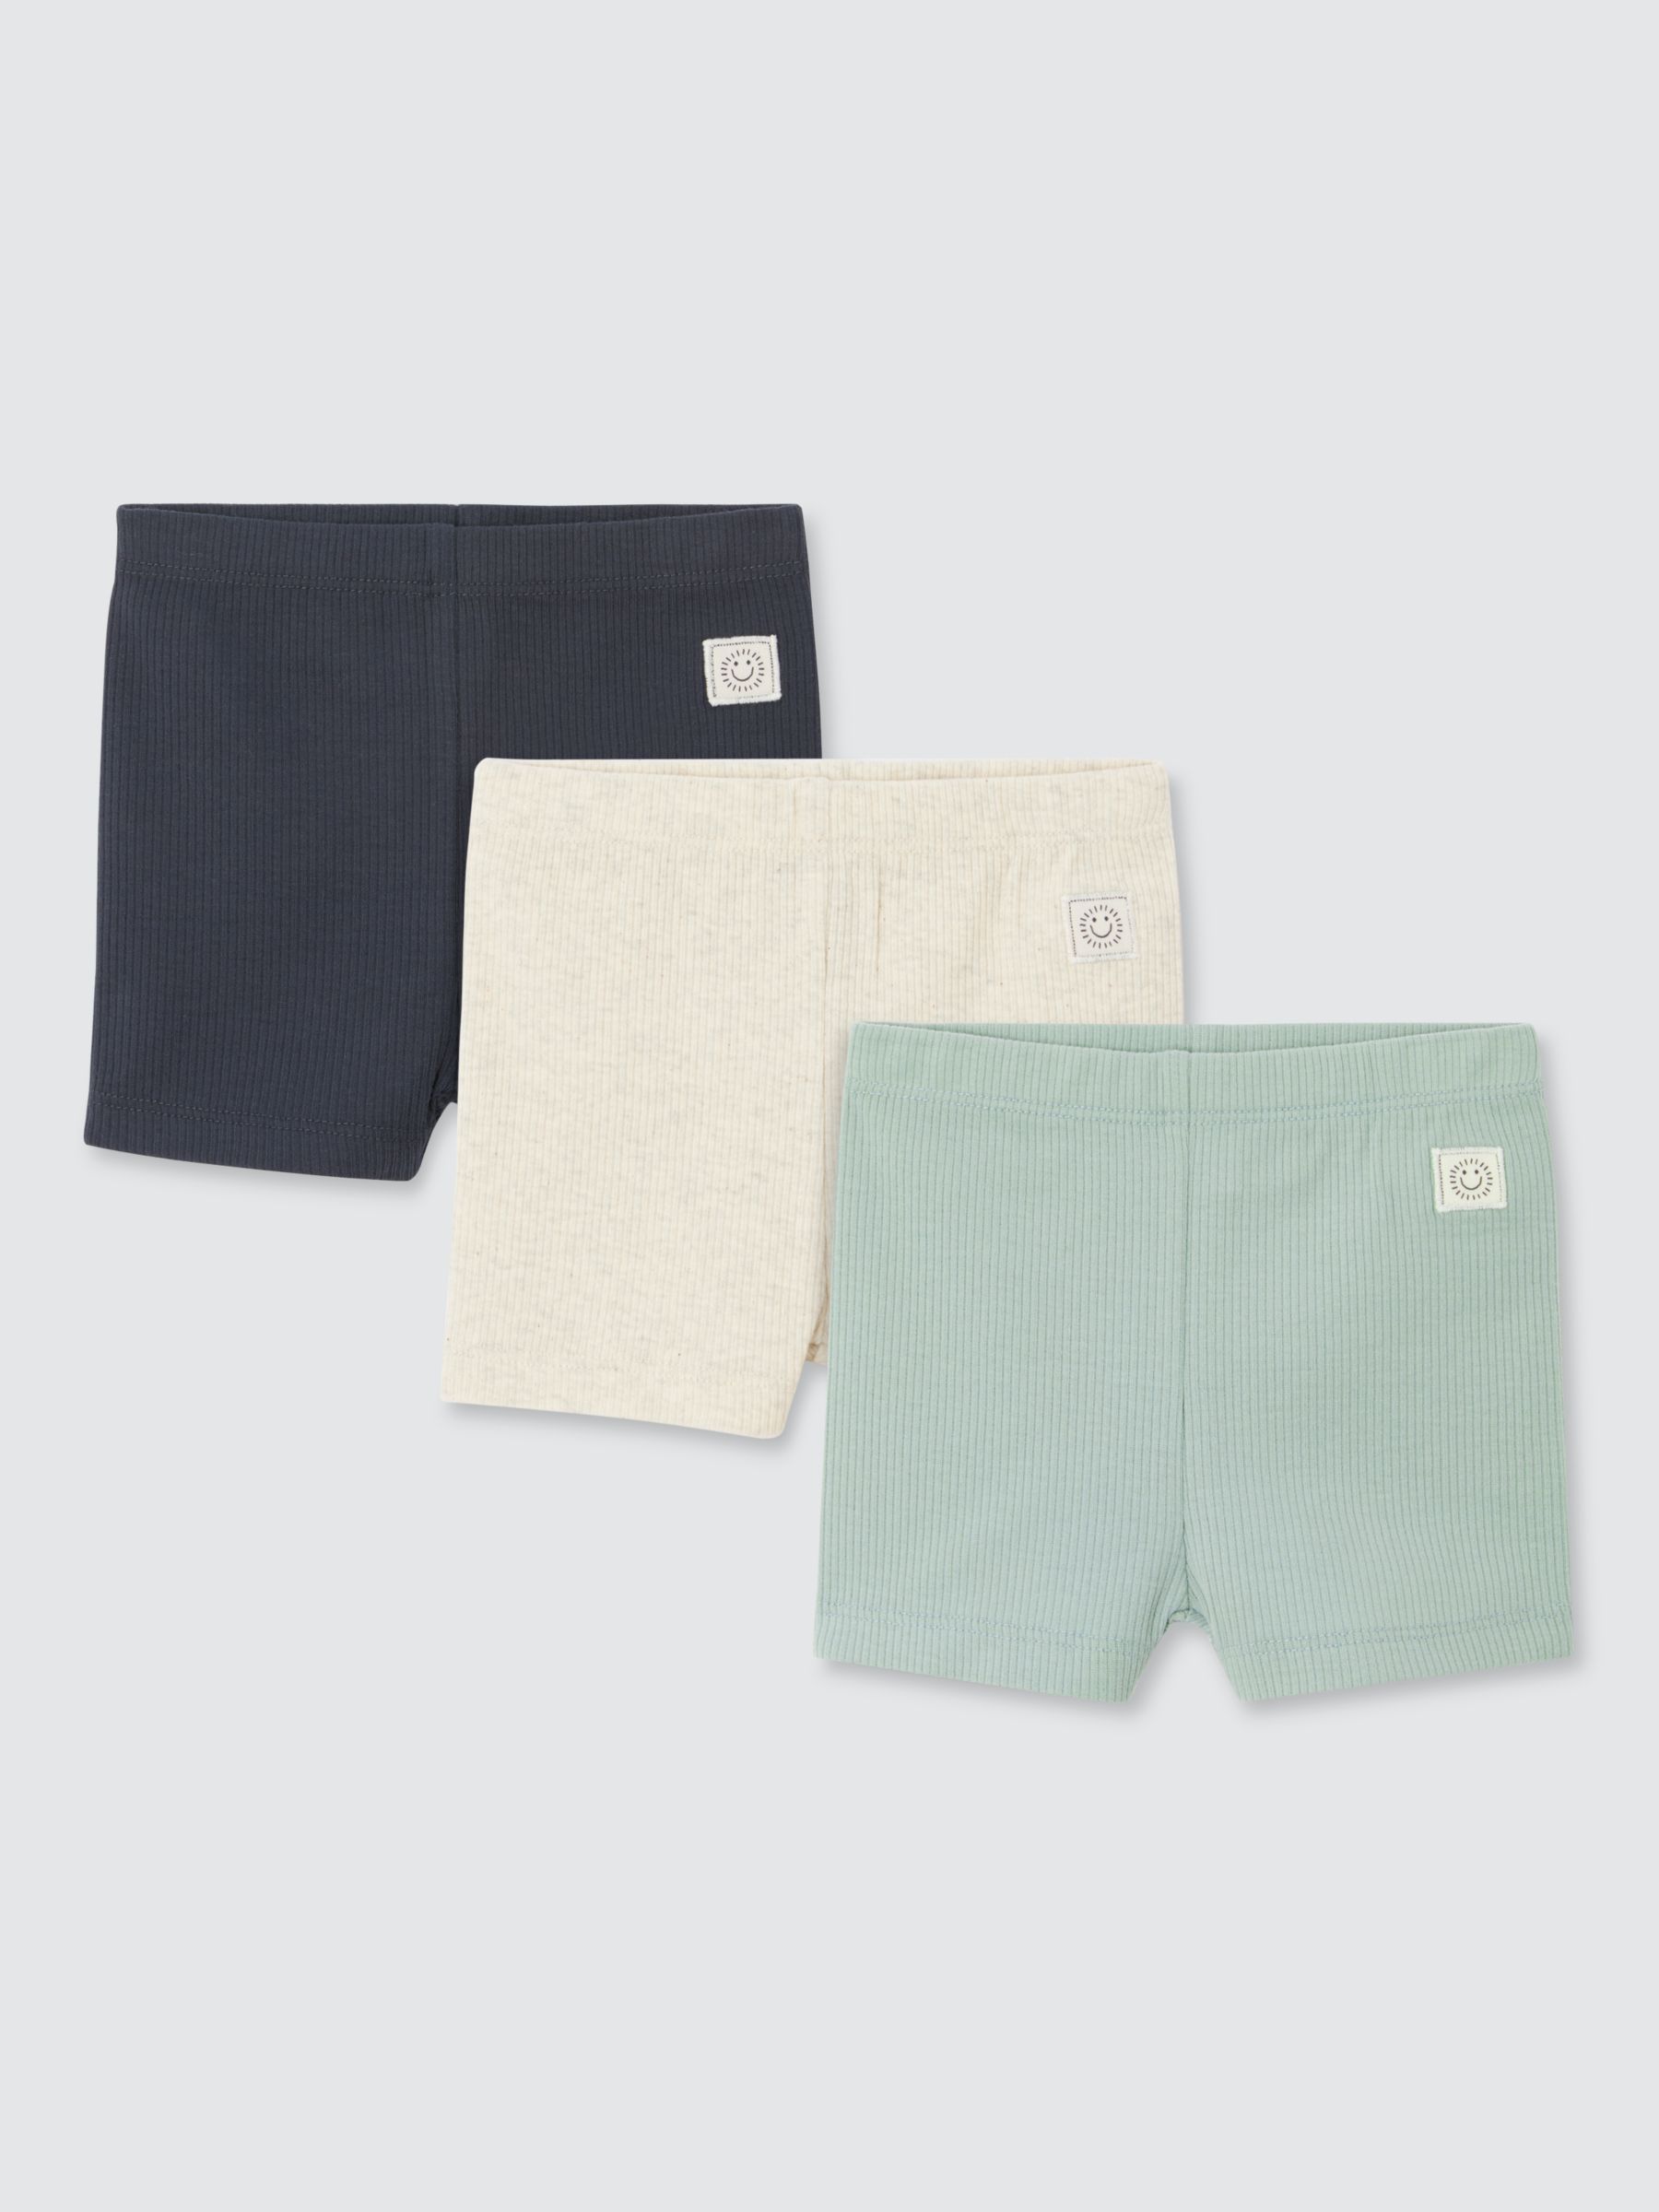 John Lewis Baby Ribbed Cycling Shorts, Pack of 3, Neutrals/Multi, 6-9 months